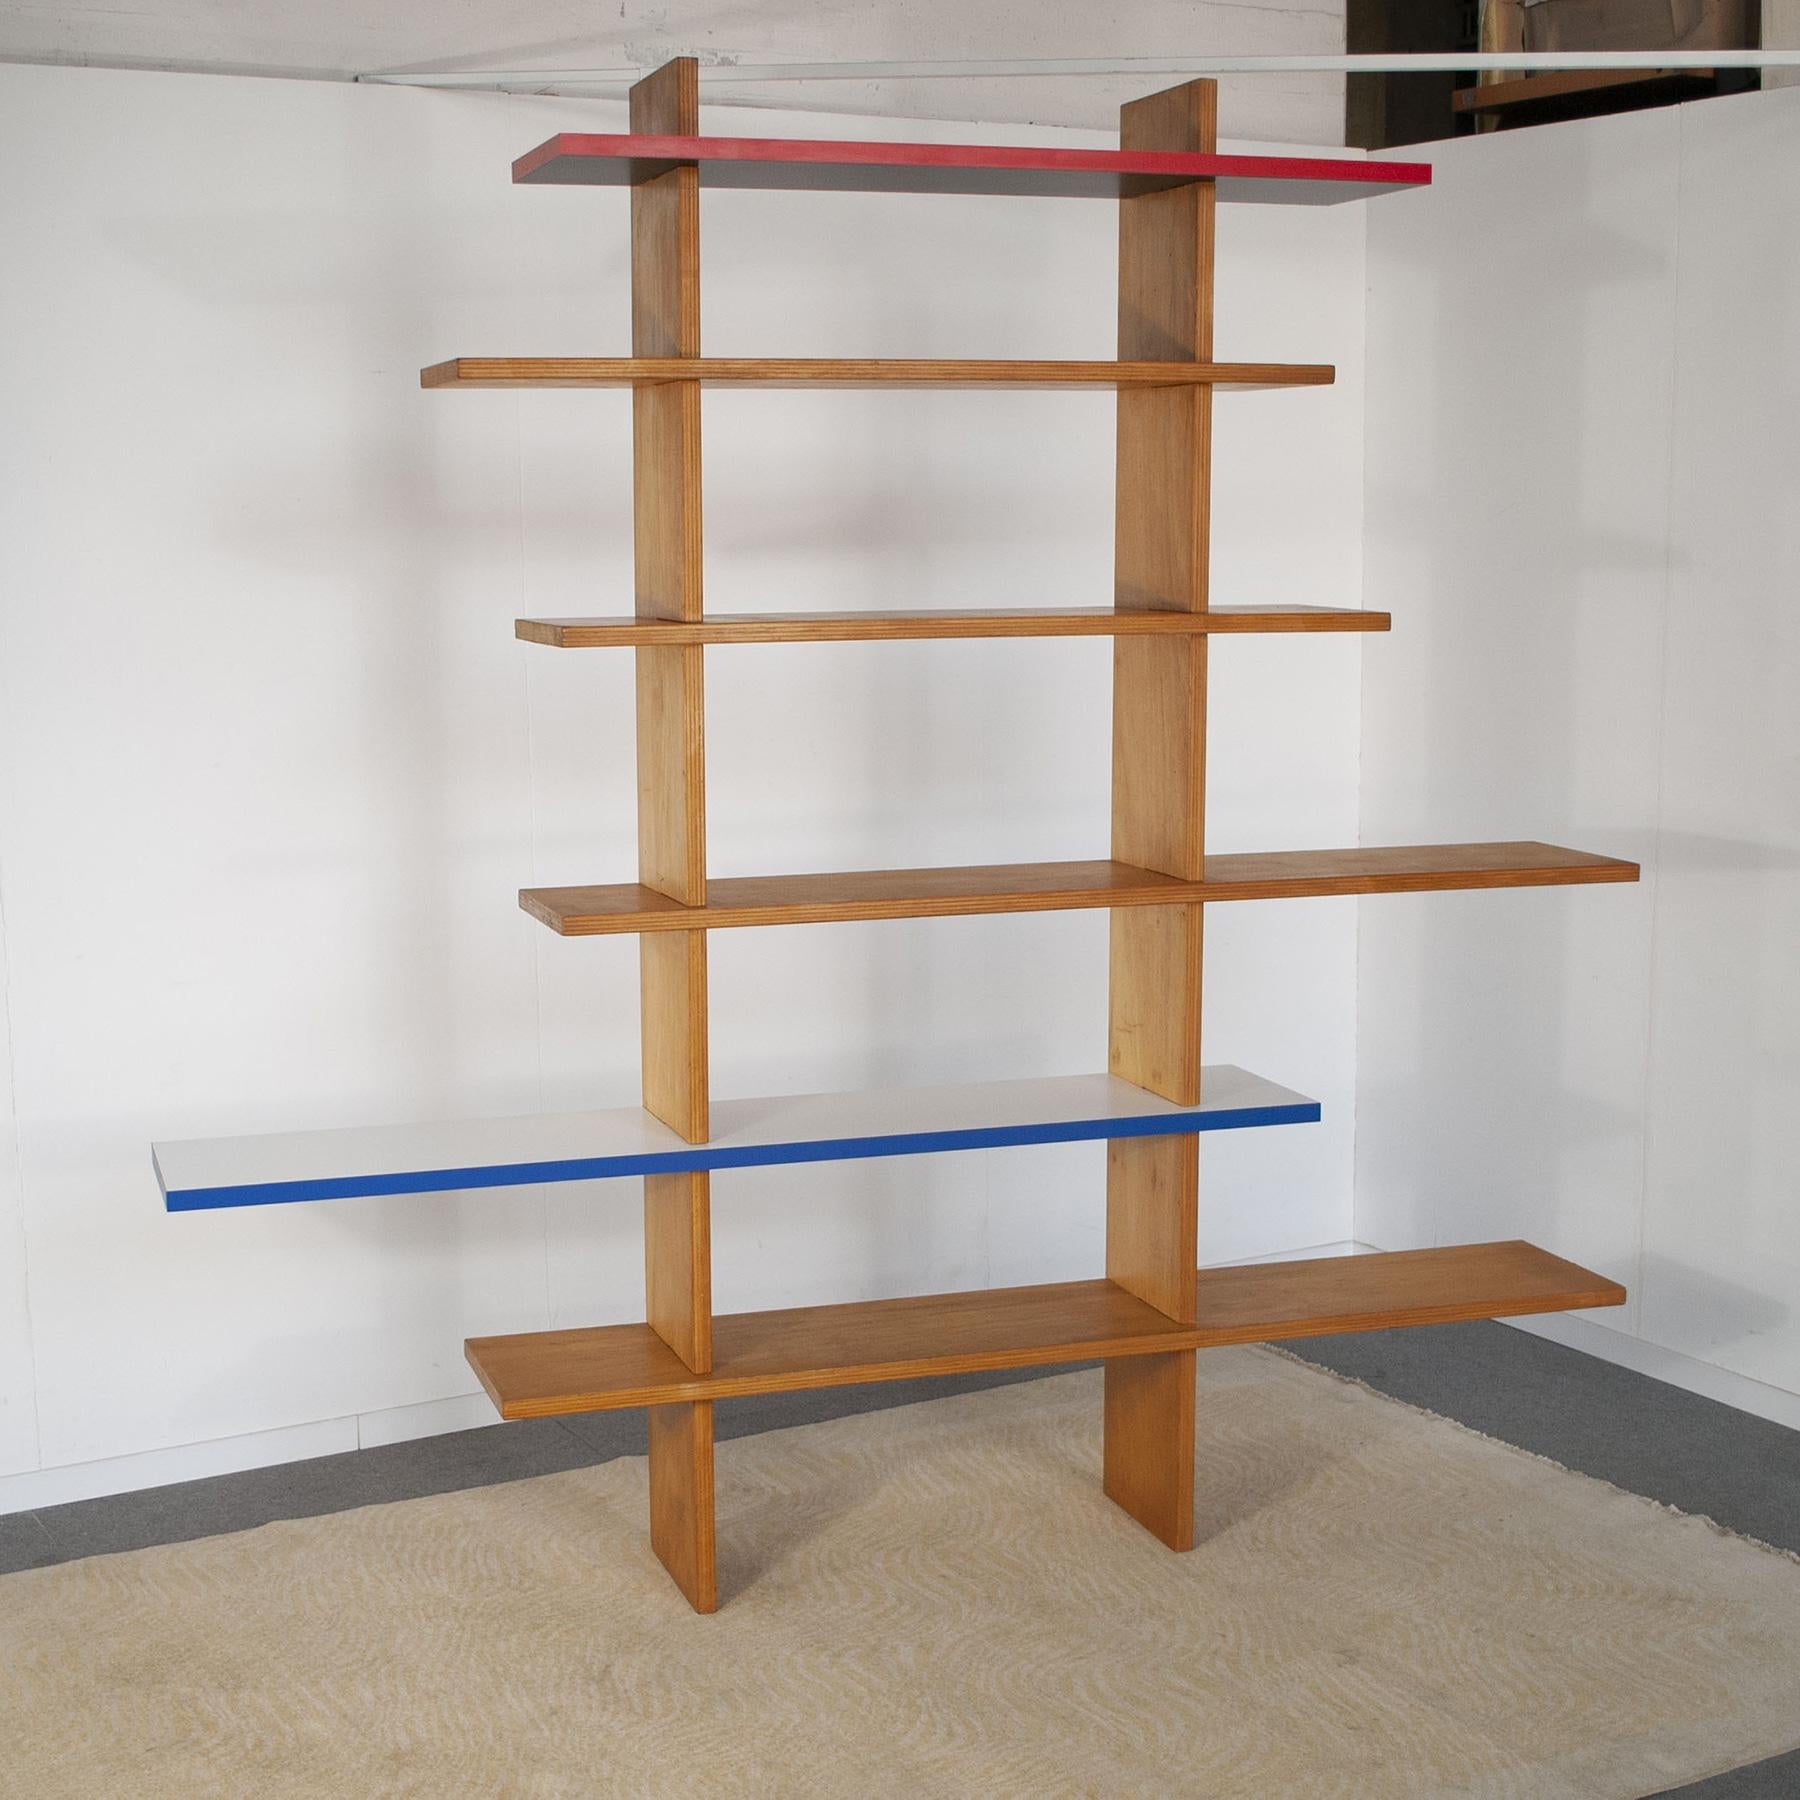 Lacquered Charlotte Perriand in the Manner Bookcase from the 1960s